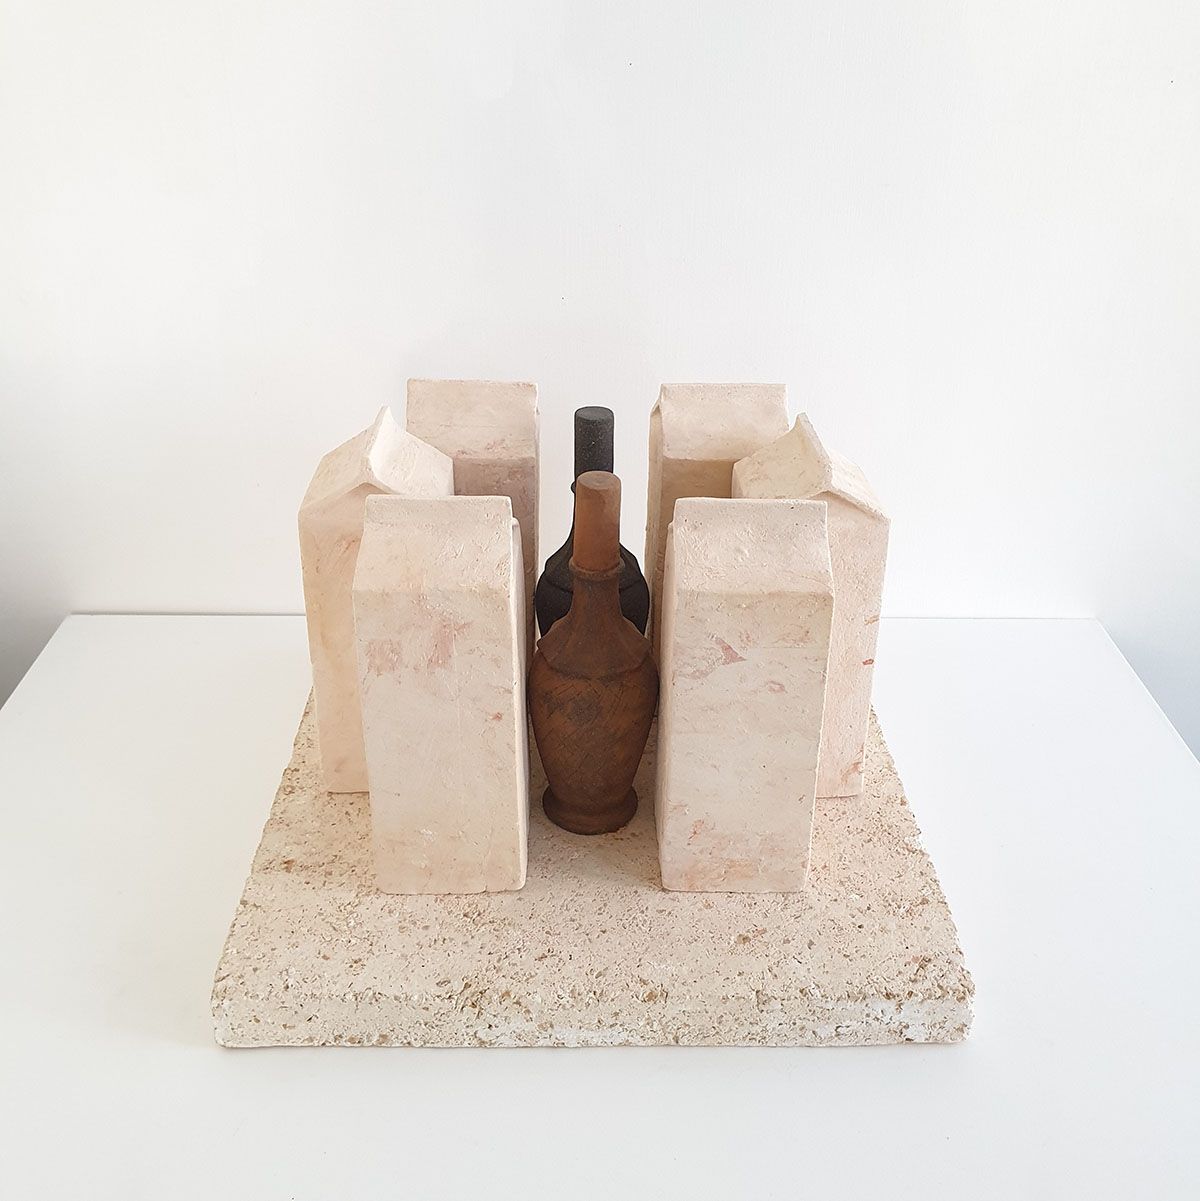 Glimpse' still-life with 6 cartons and 2 bottles, 1980